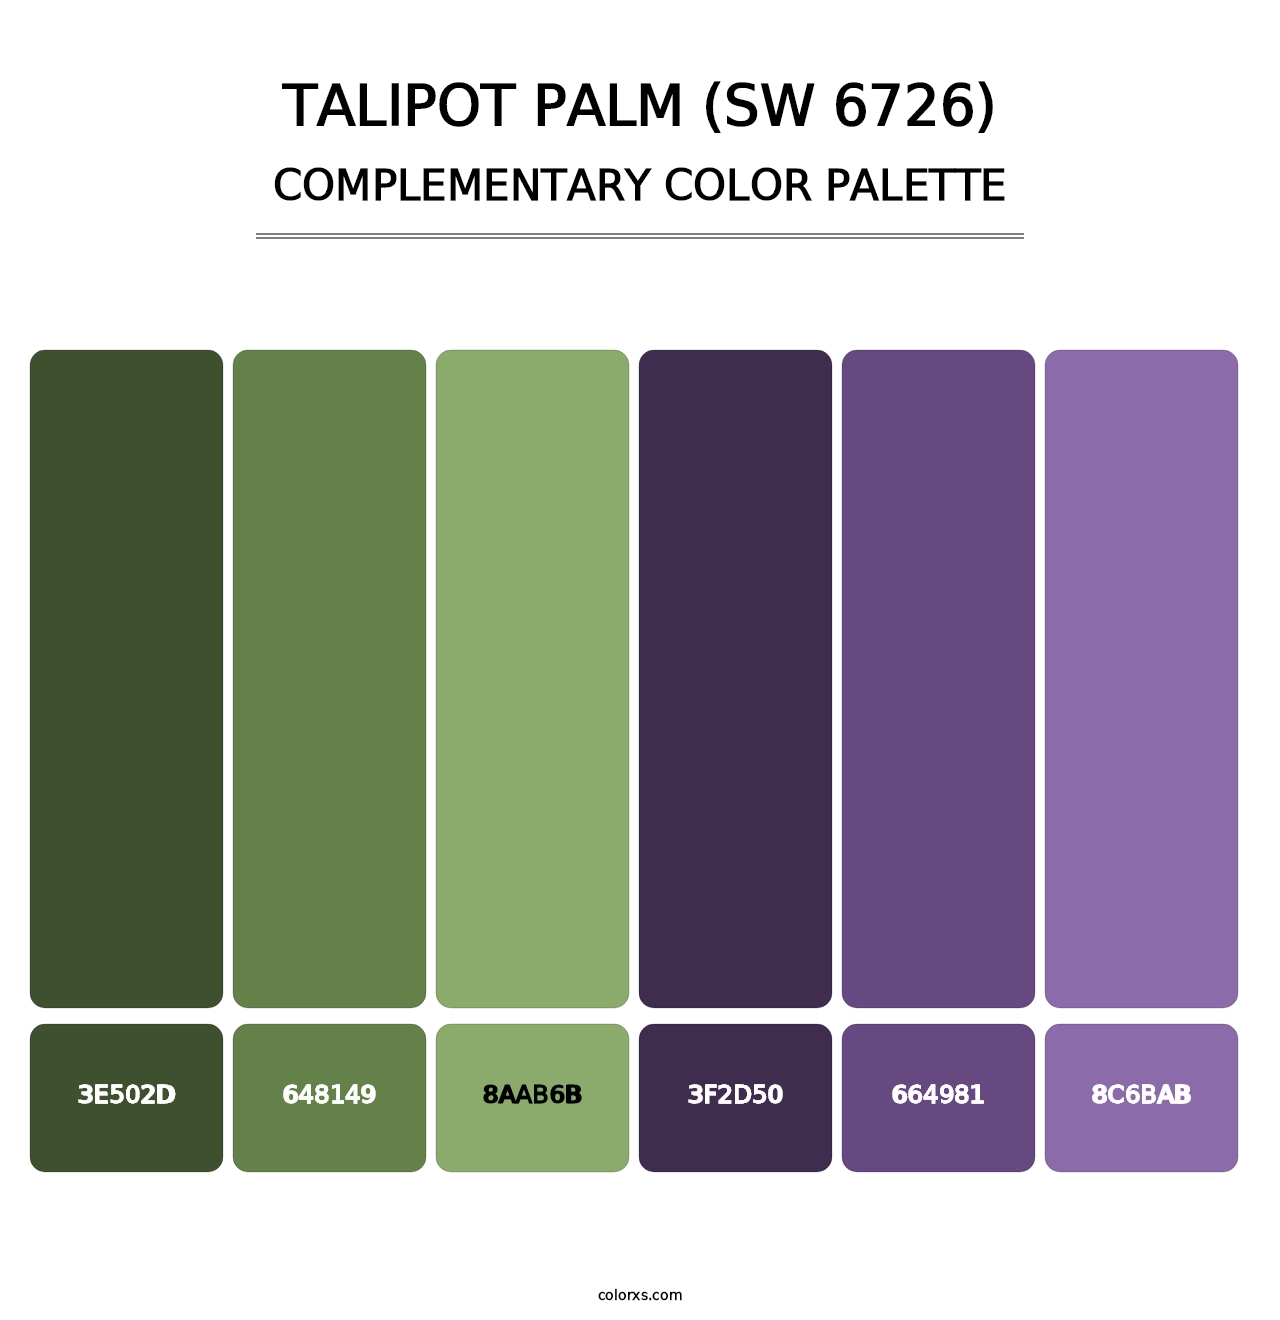 Talipot Palm (SW 6726) - Complementary Color Palette